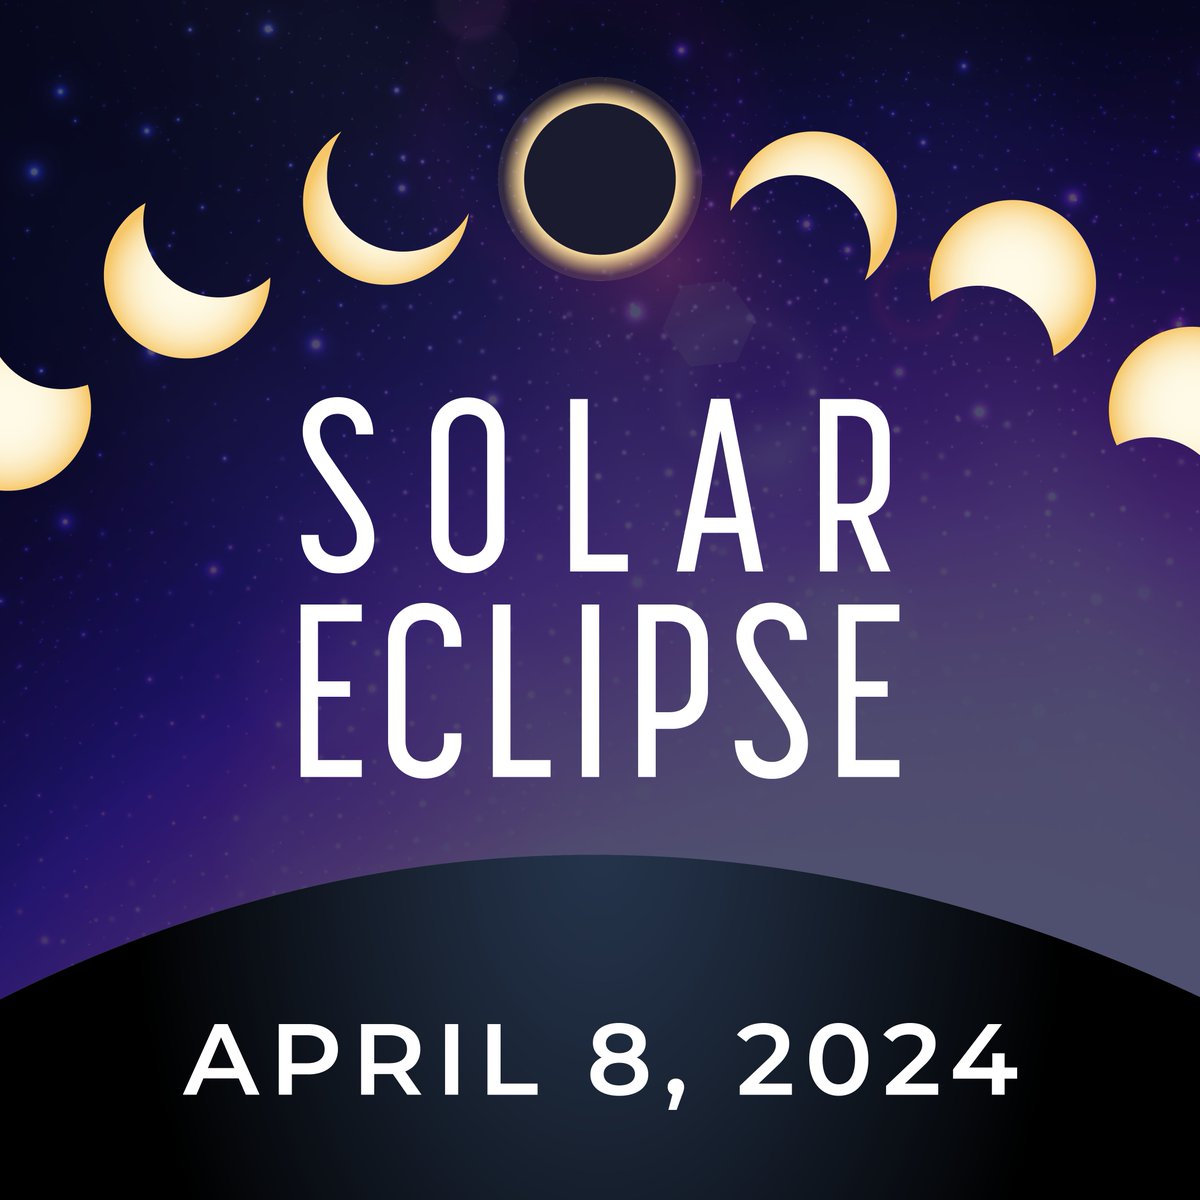 This solar eclipse will steal the spotlight on April 8! Join us tomorrow at 11:45 a.m. at the College of Sciences & Technology for a talk and viewing. 🌑 🌔